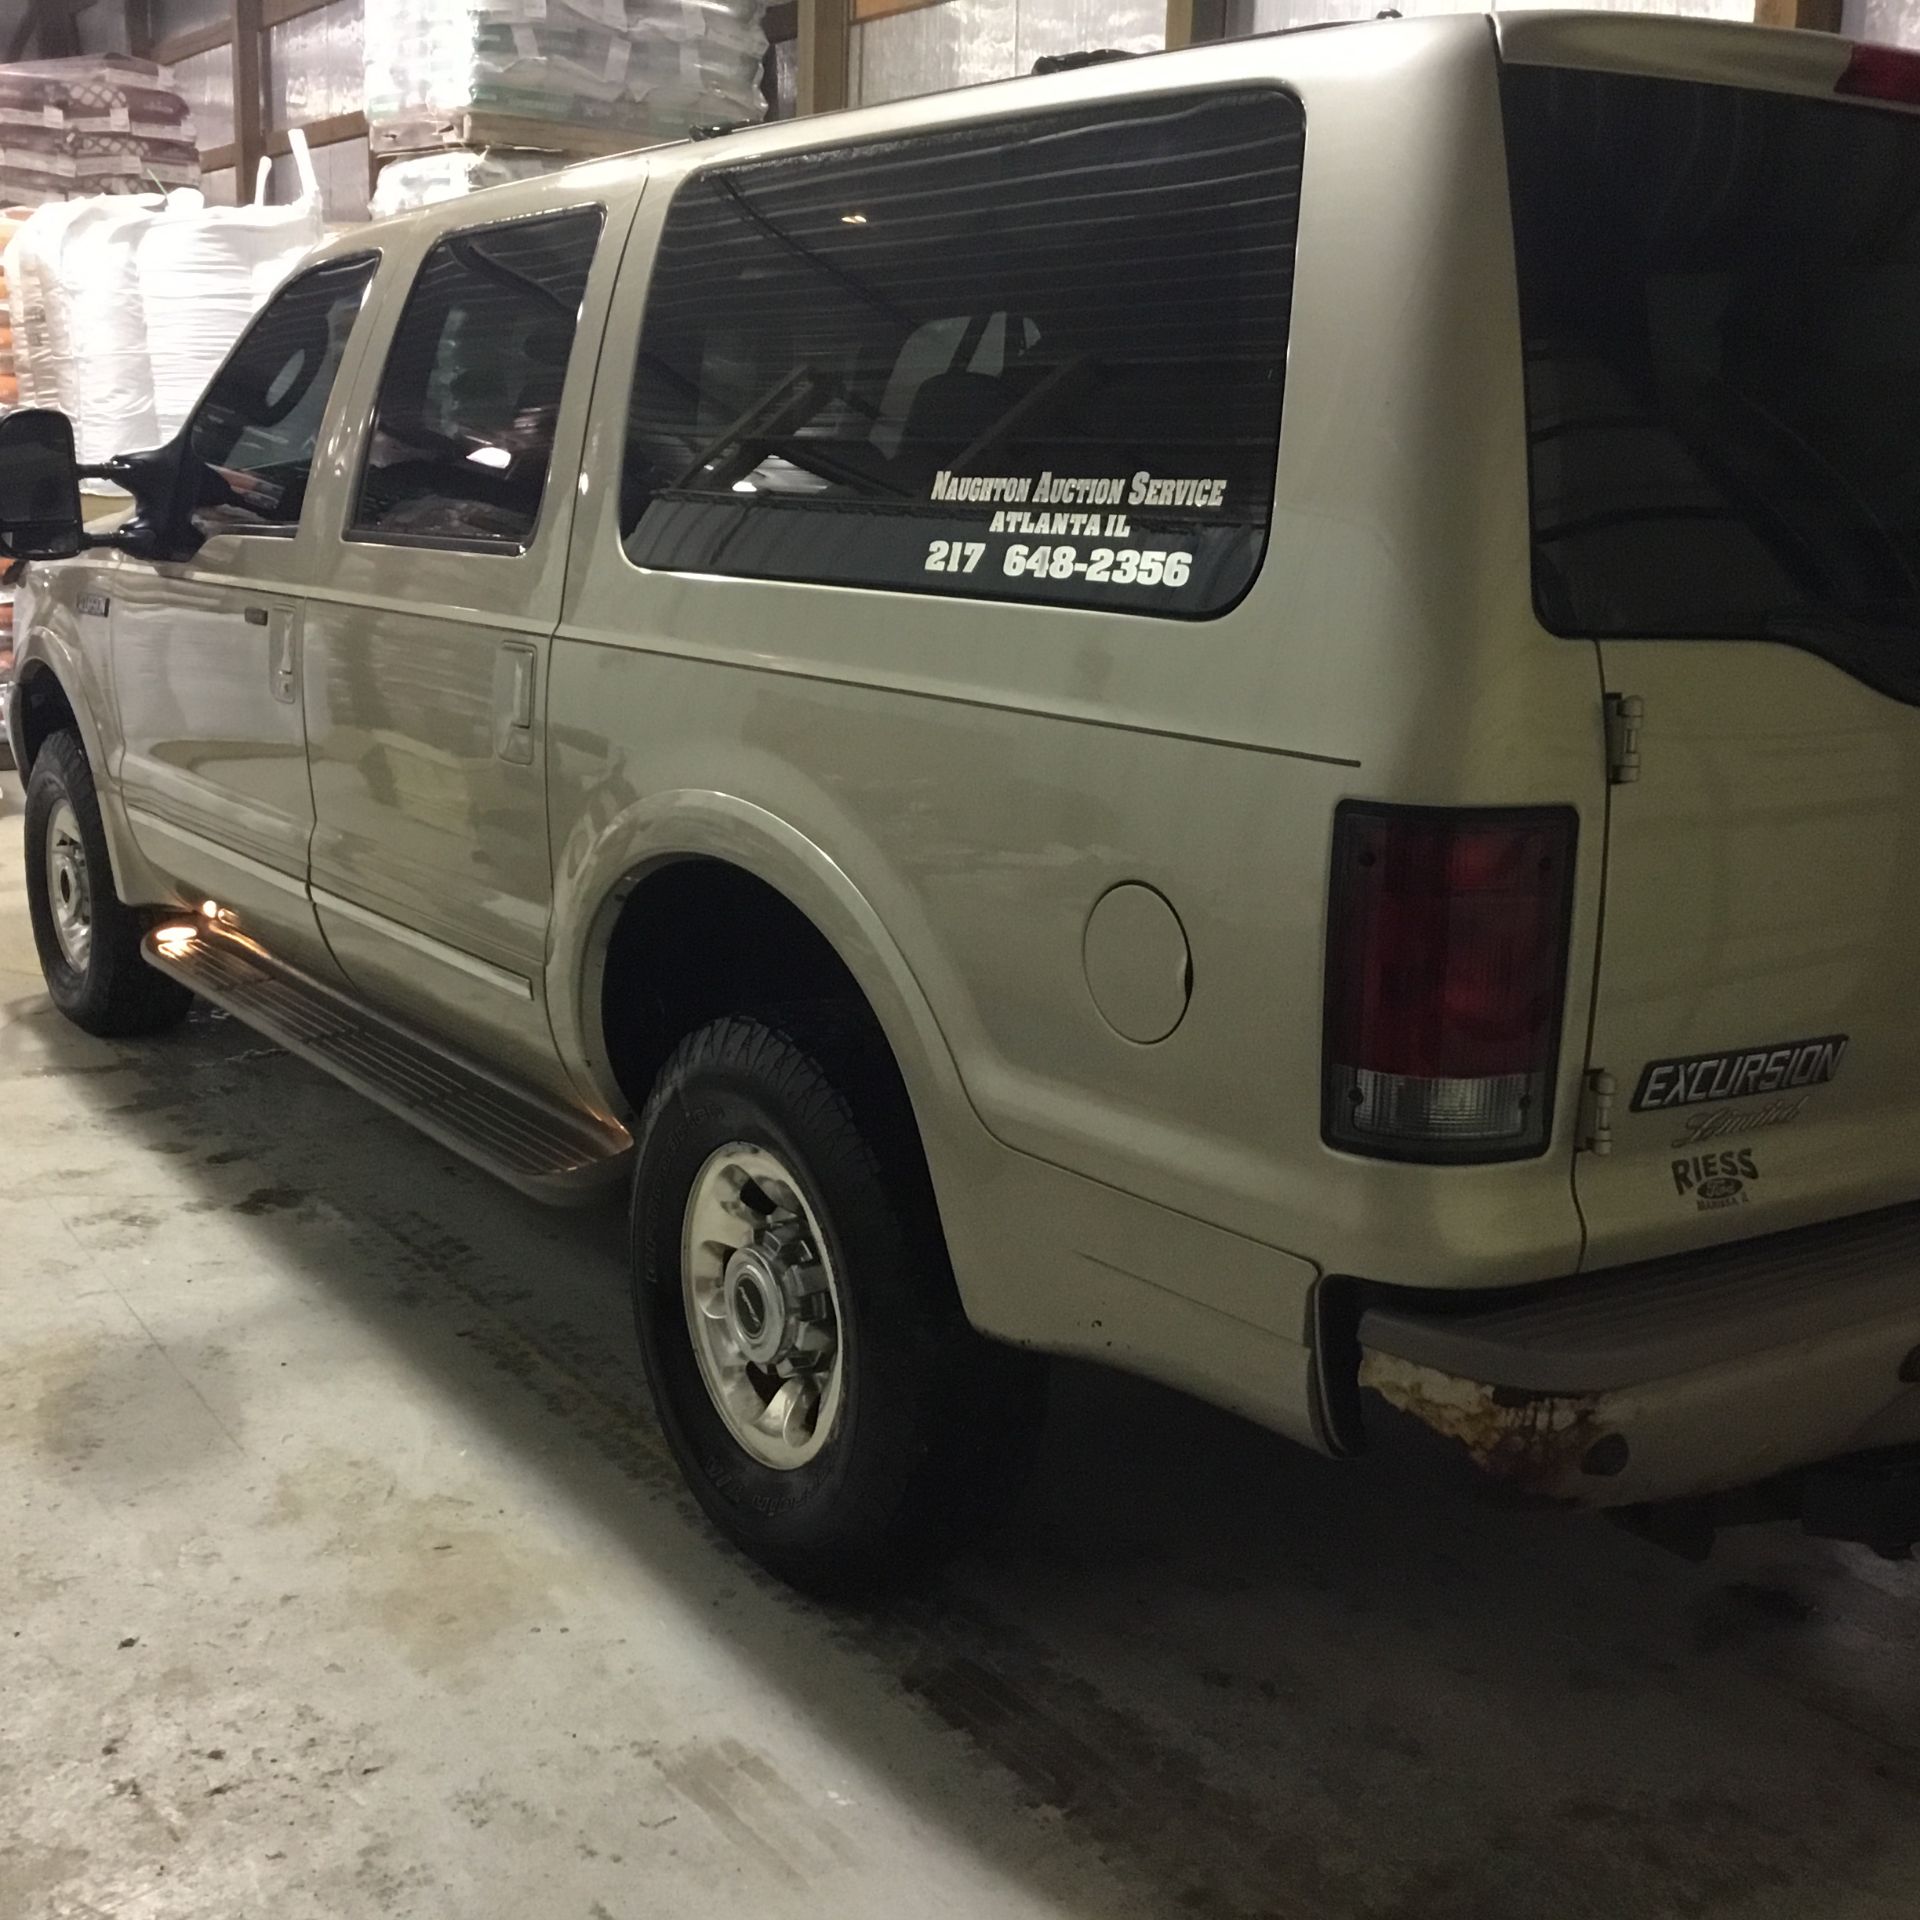 2004 Ford Excursion Limited, 6.0 Diesel, 4x4, 205,000 Miles, Vin 1C4NJPBB2HD103824, Tan, Good - Image 9 of 12